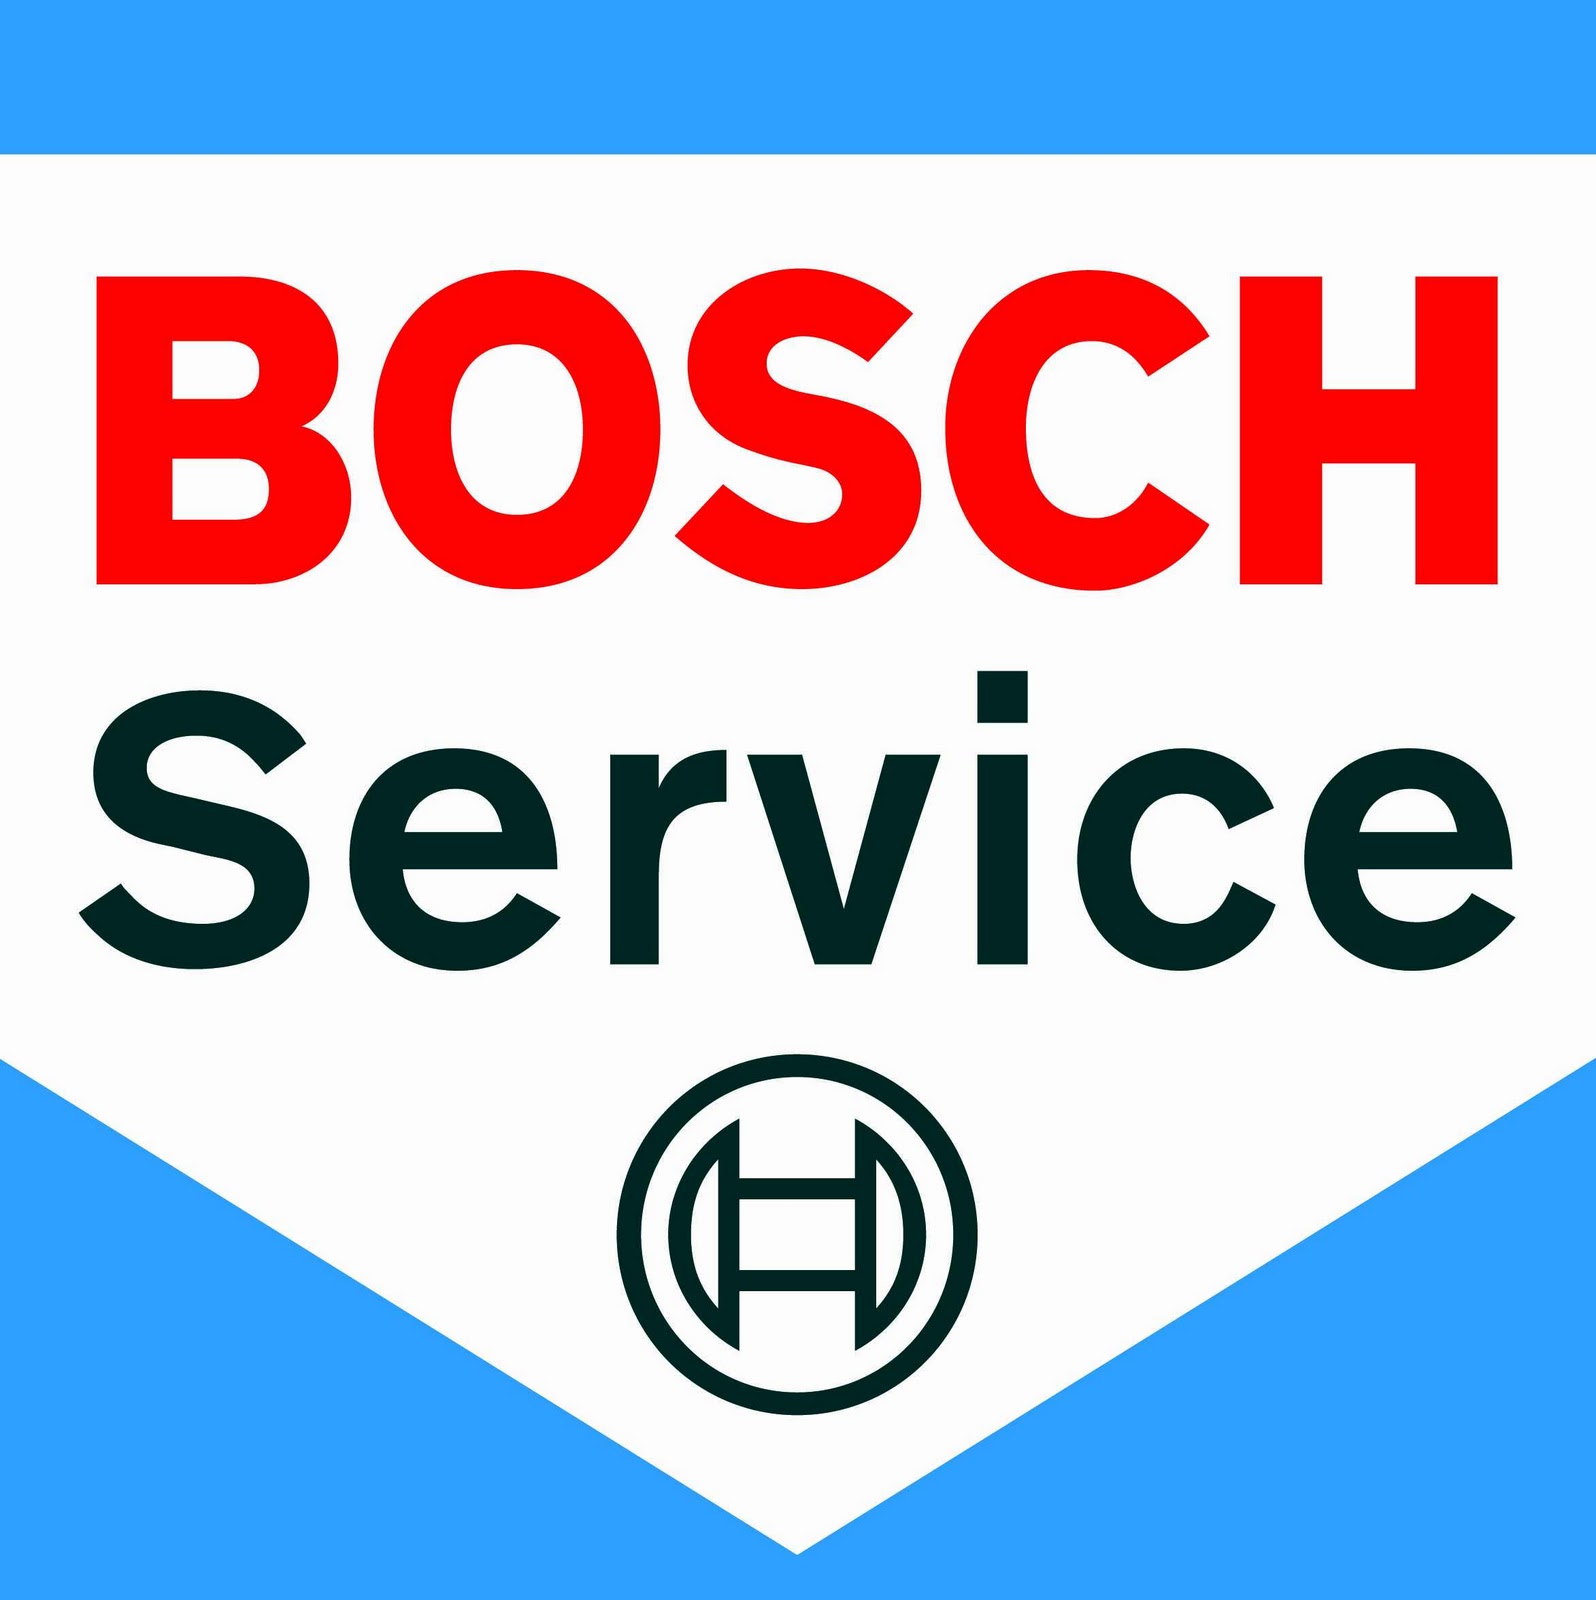 My Logo Pictures: Bosch Logos